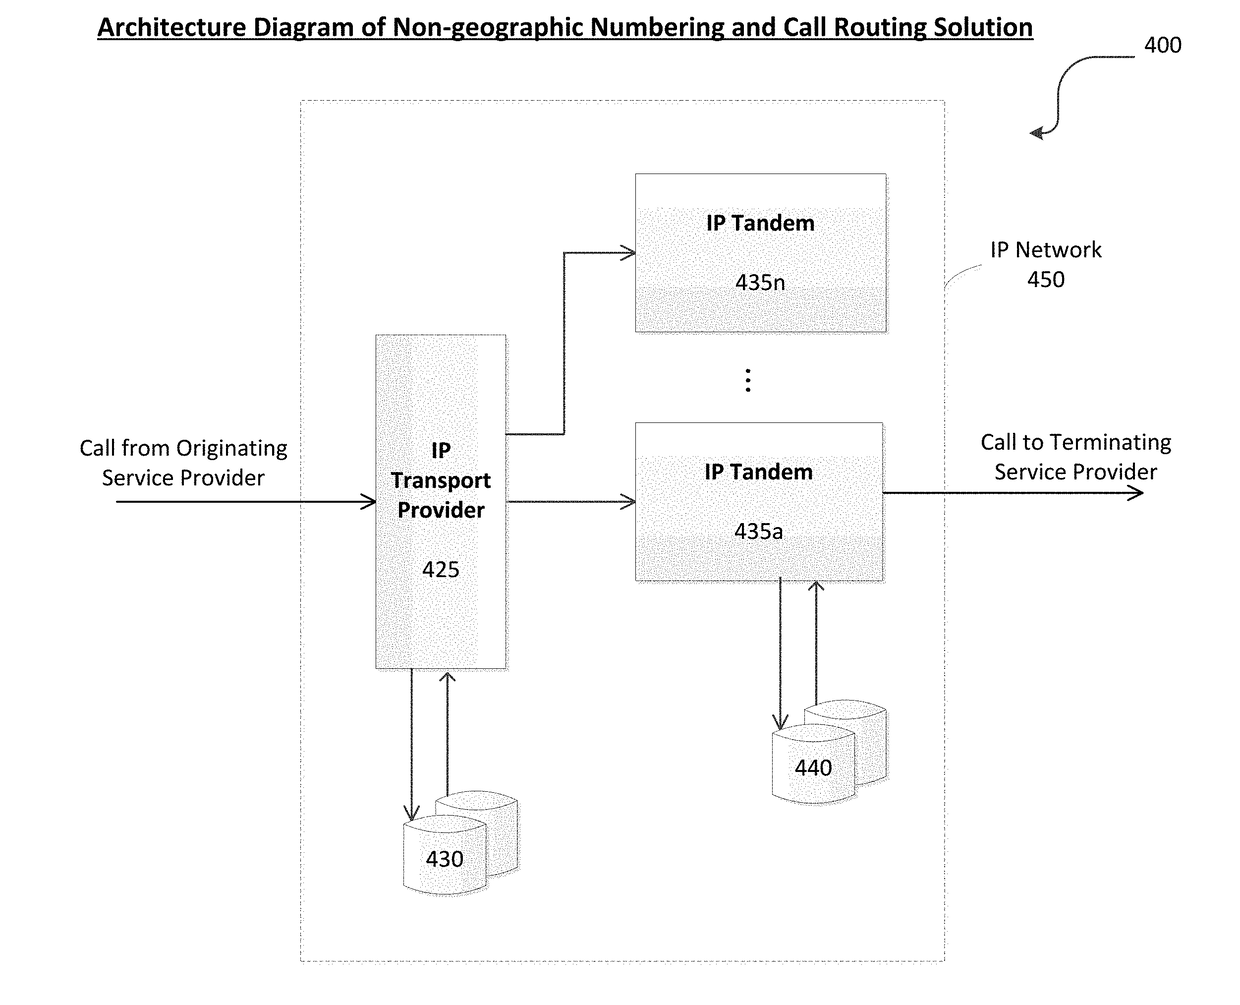 Non-geographic numbering and call routing